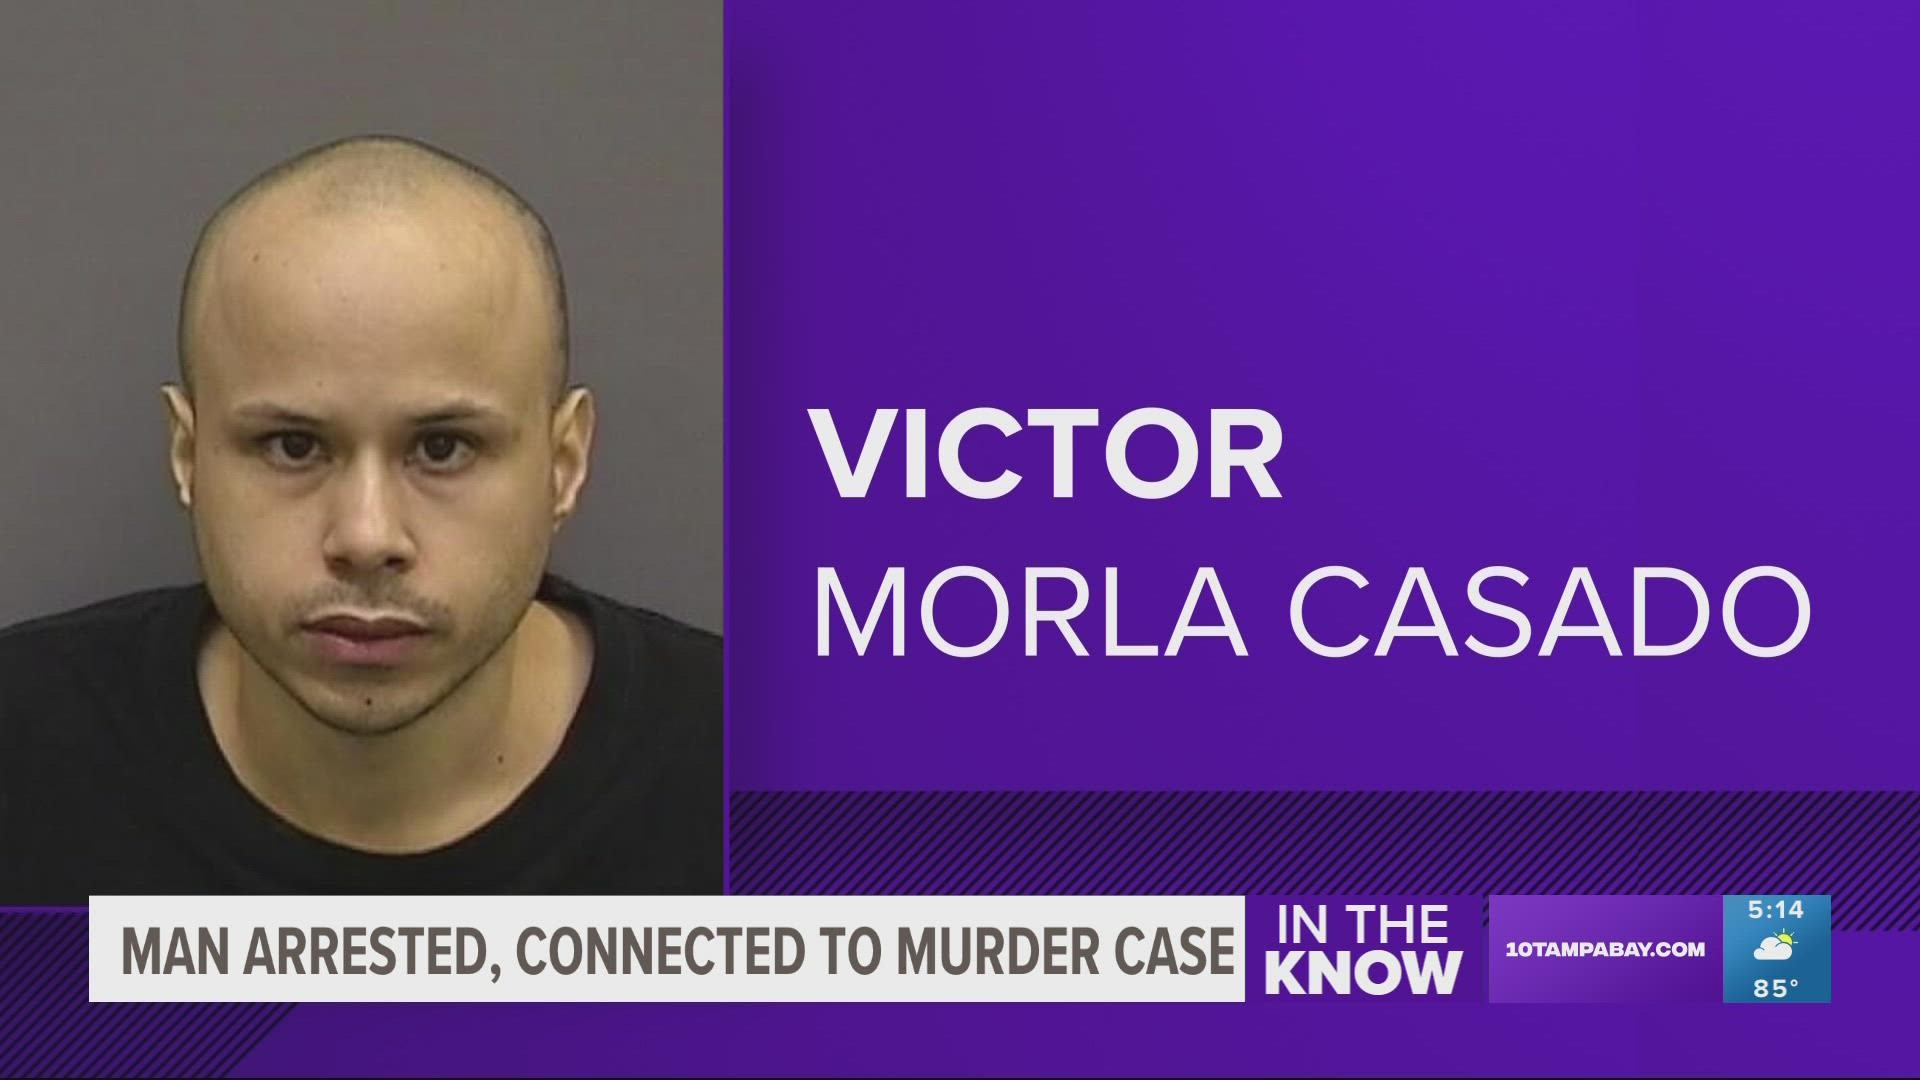 Deputies say Victor Morla Casado is facing a first-degree murder charge.